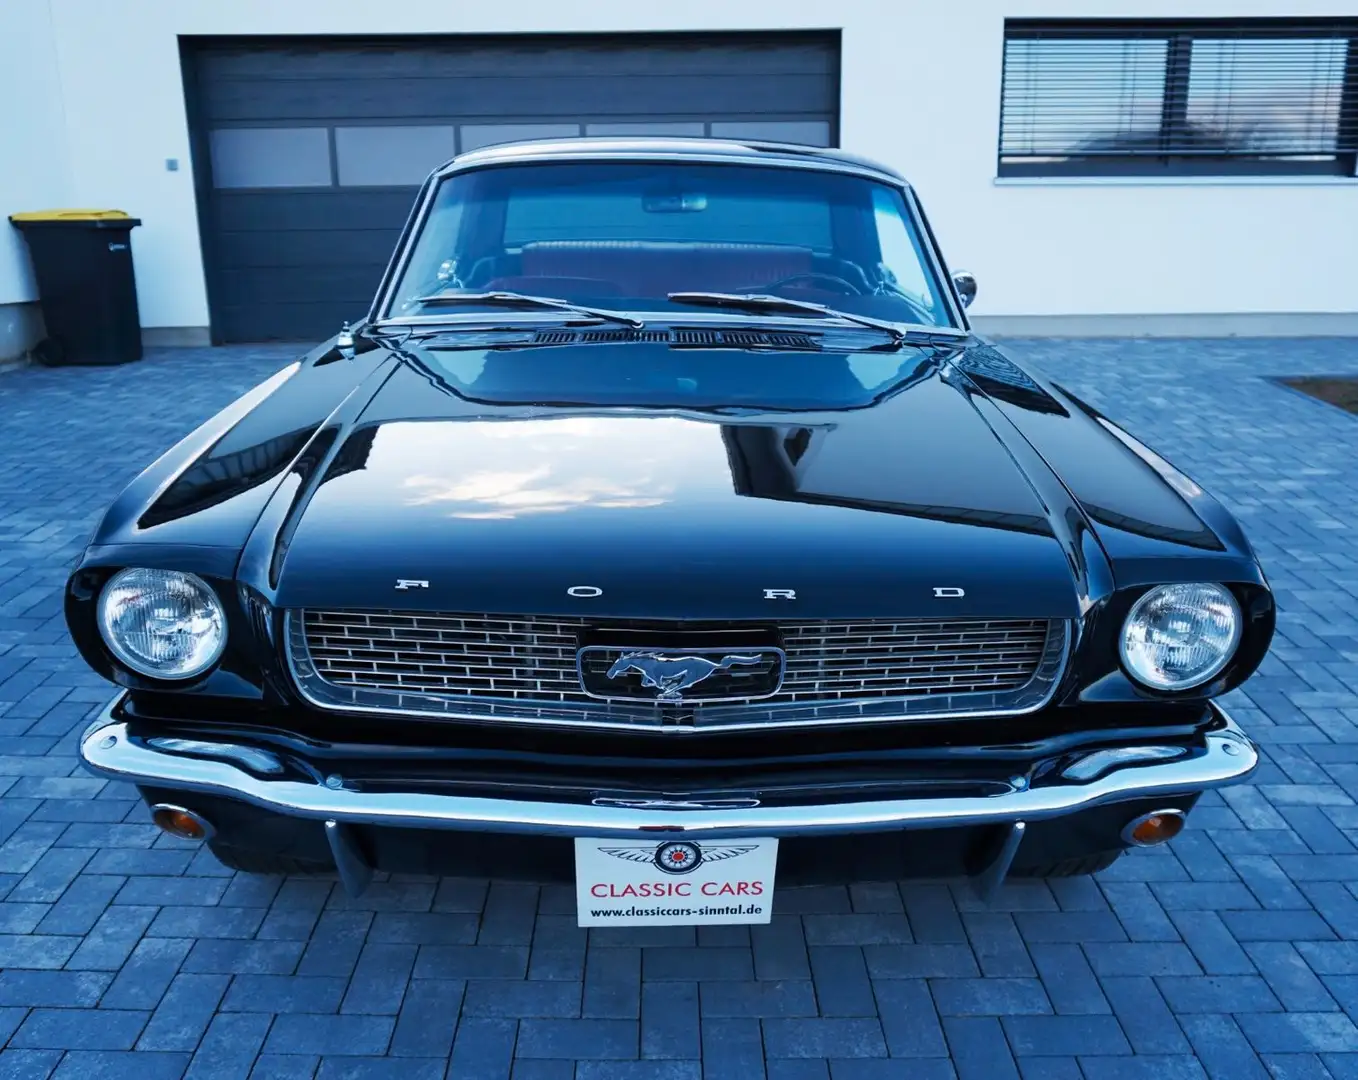 Ford Mustang "GT STYLE" mit Pony Deluxe Interior - V8 Schwarz - 2